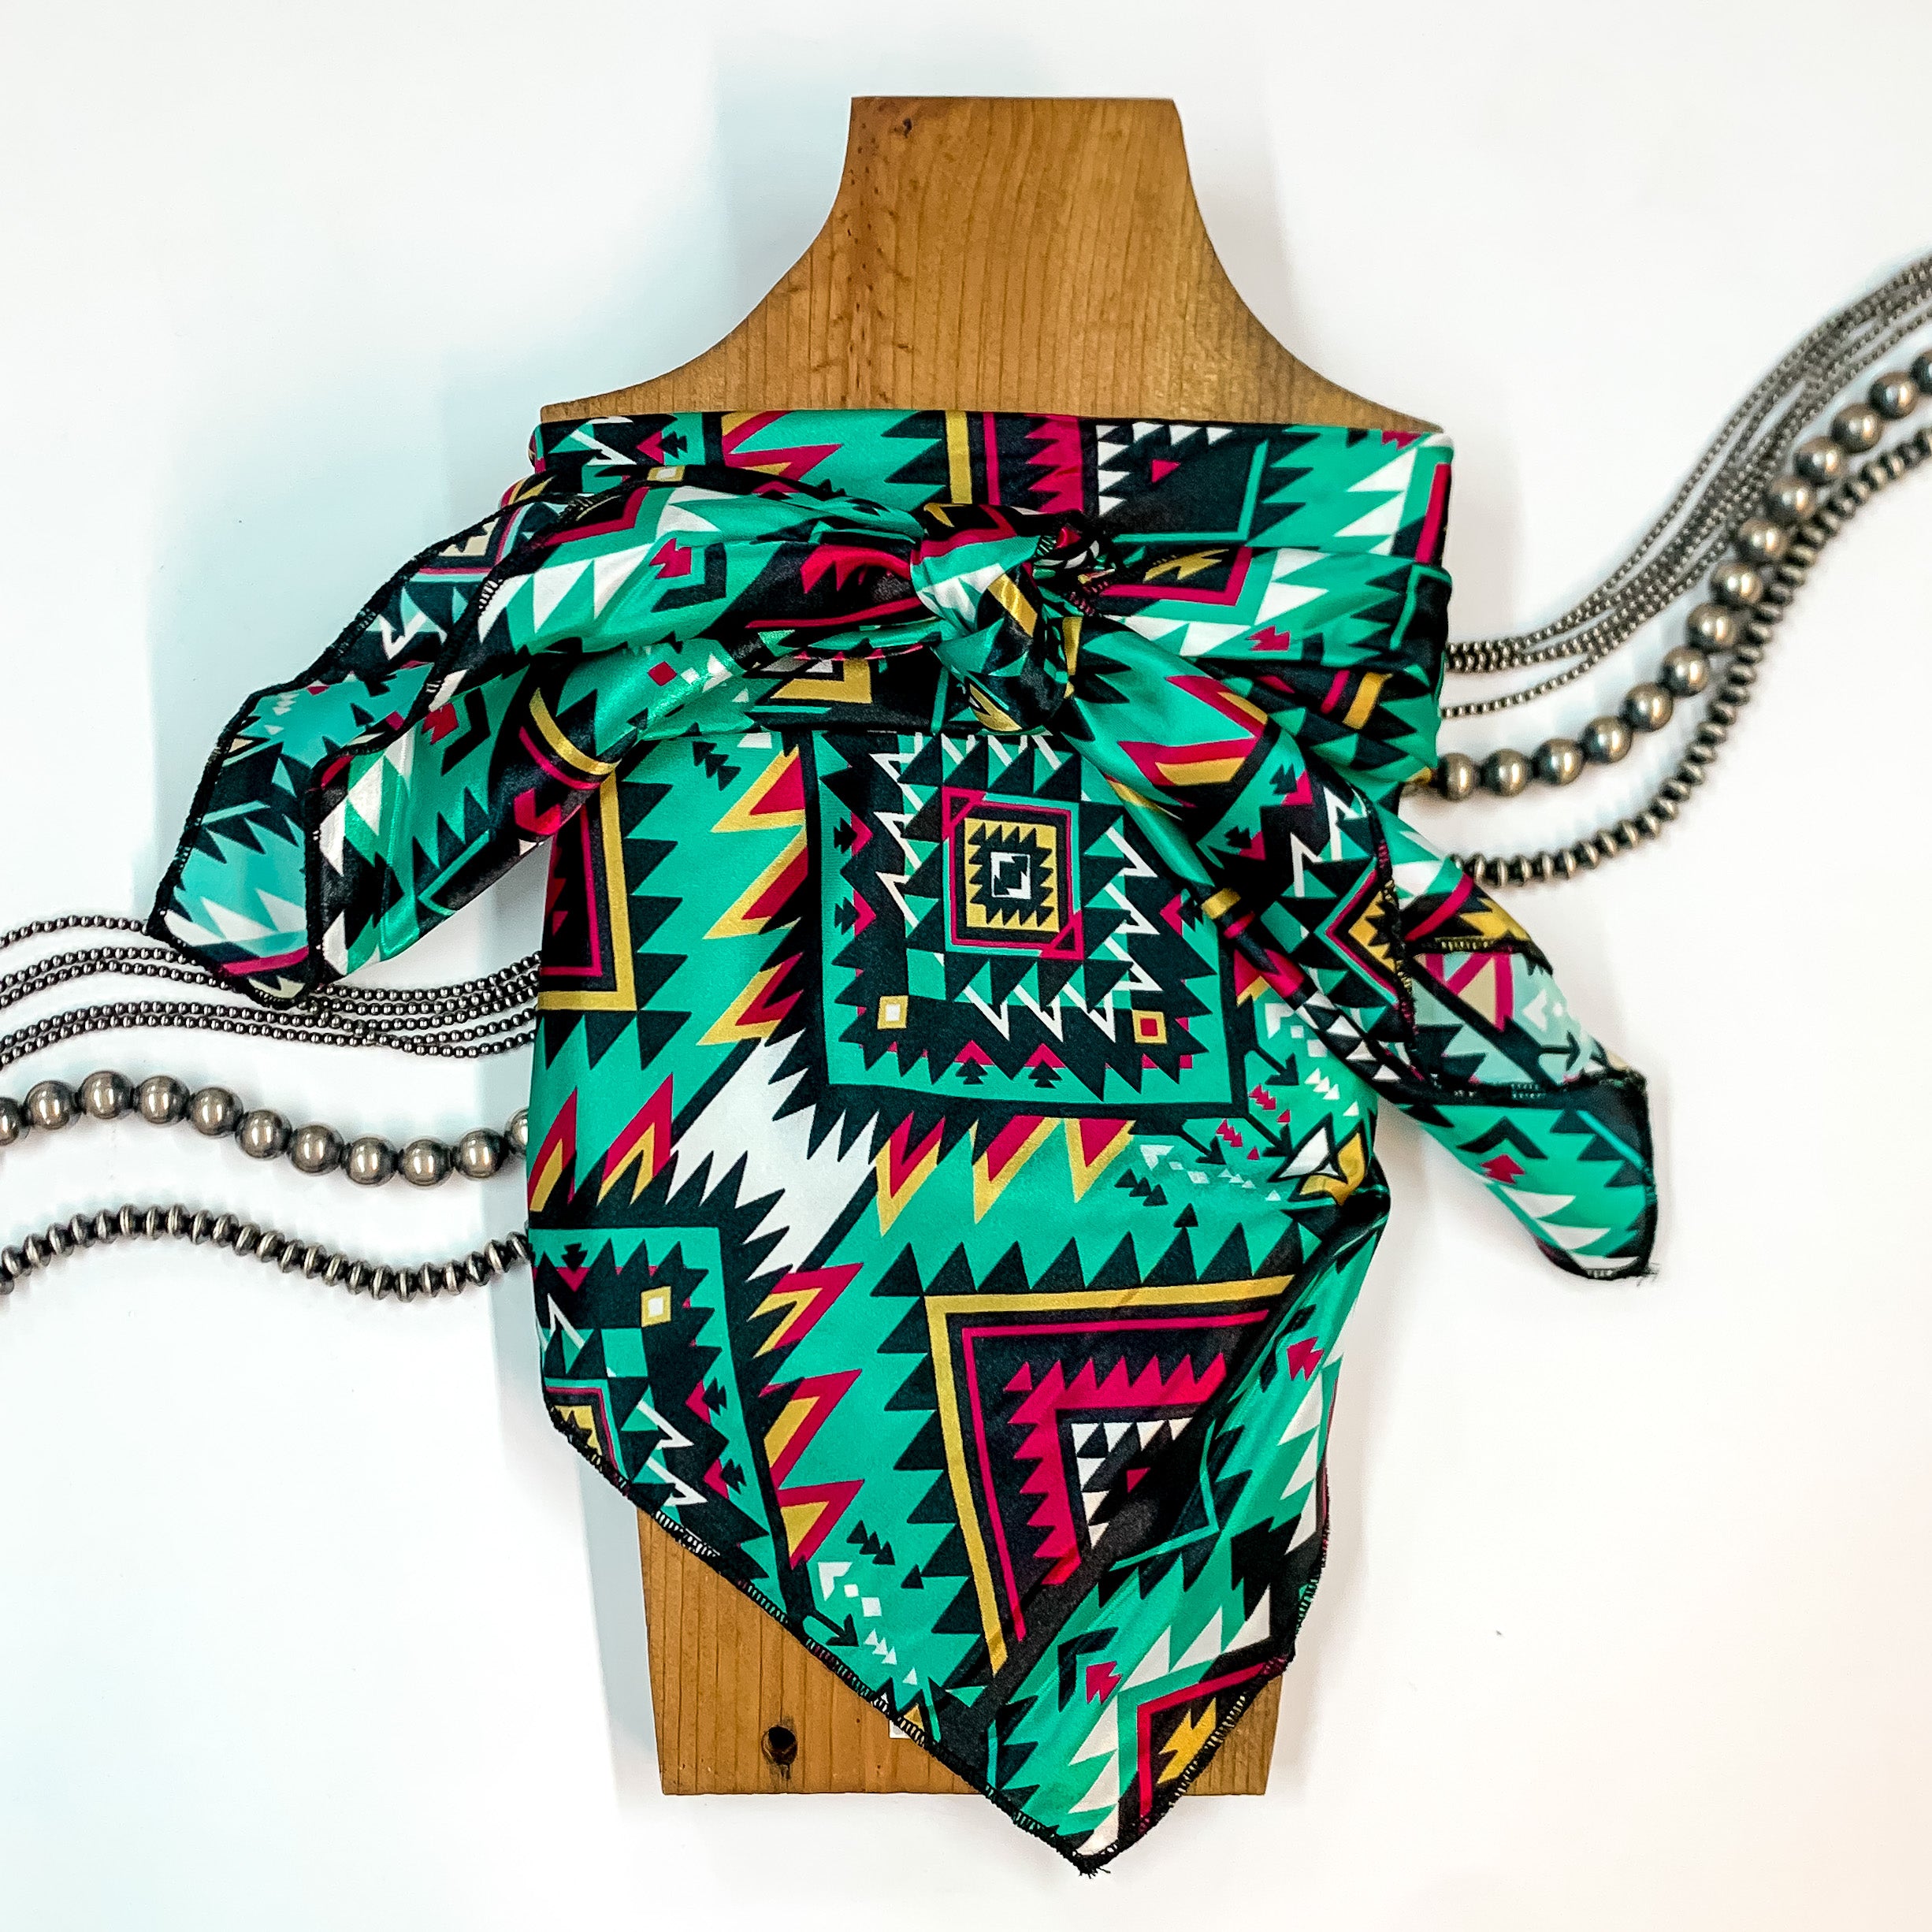 Patterned scarf in Santa Fe. Scarf is tied around a wooden piece. The scarf and piece of wood is pictured on a white background with Navajo jewelry spread out around it.